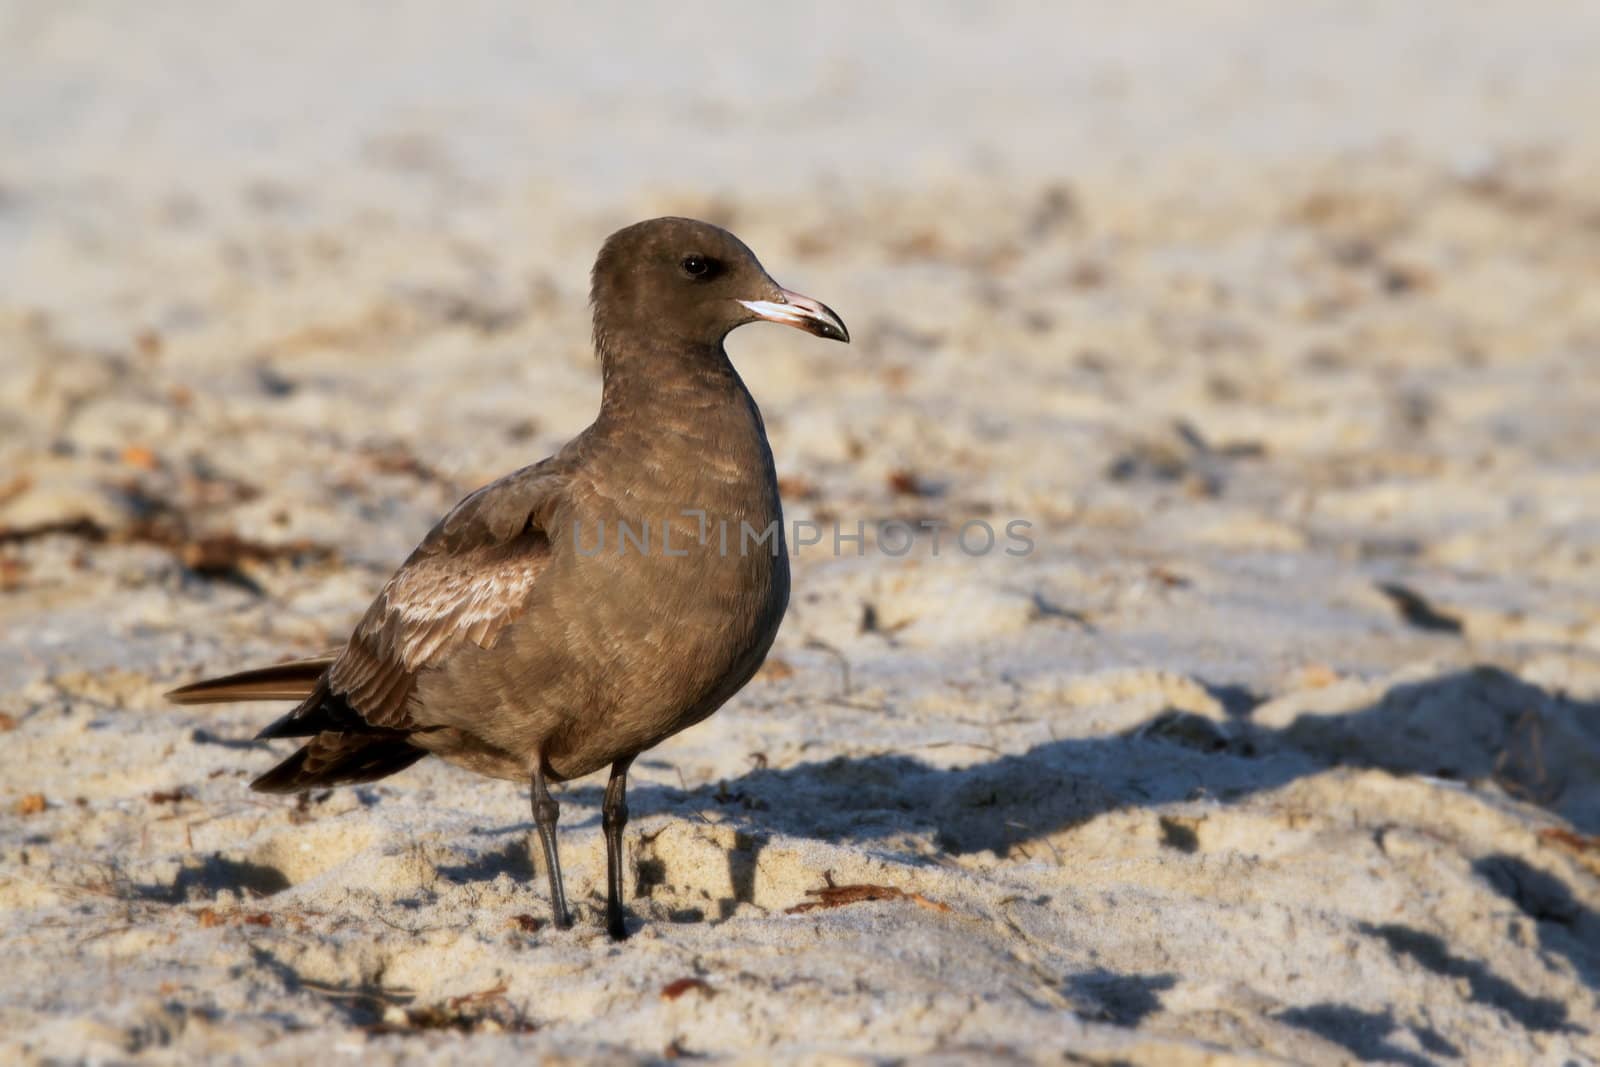 A California brown seagull on the beach with sand.